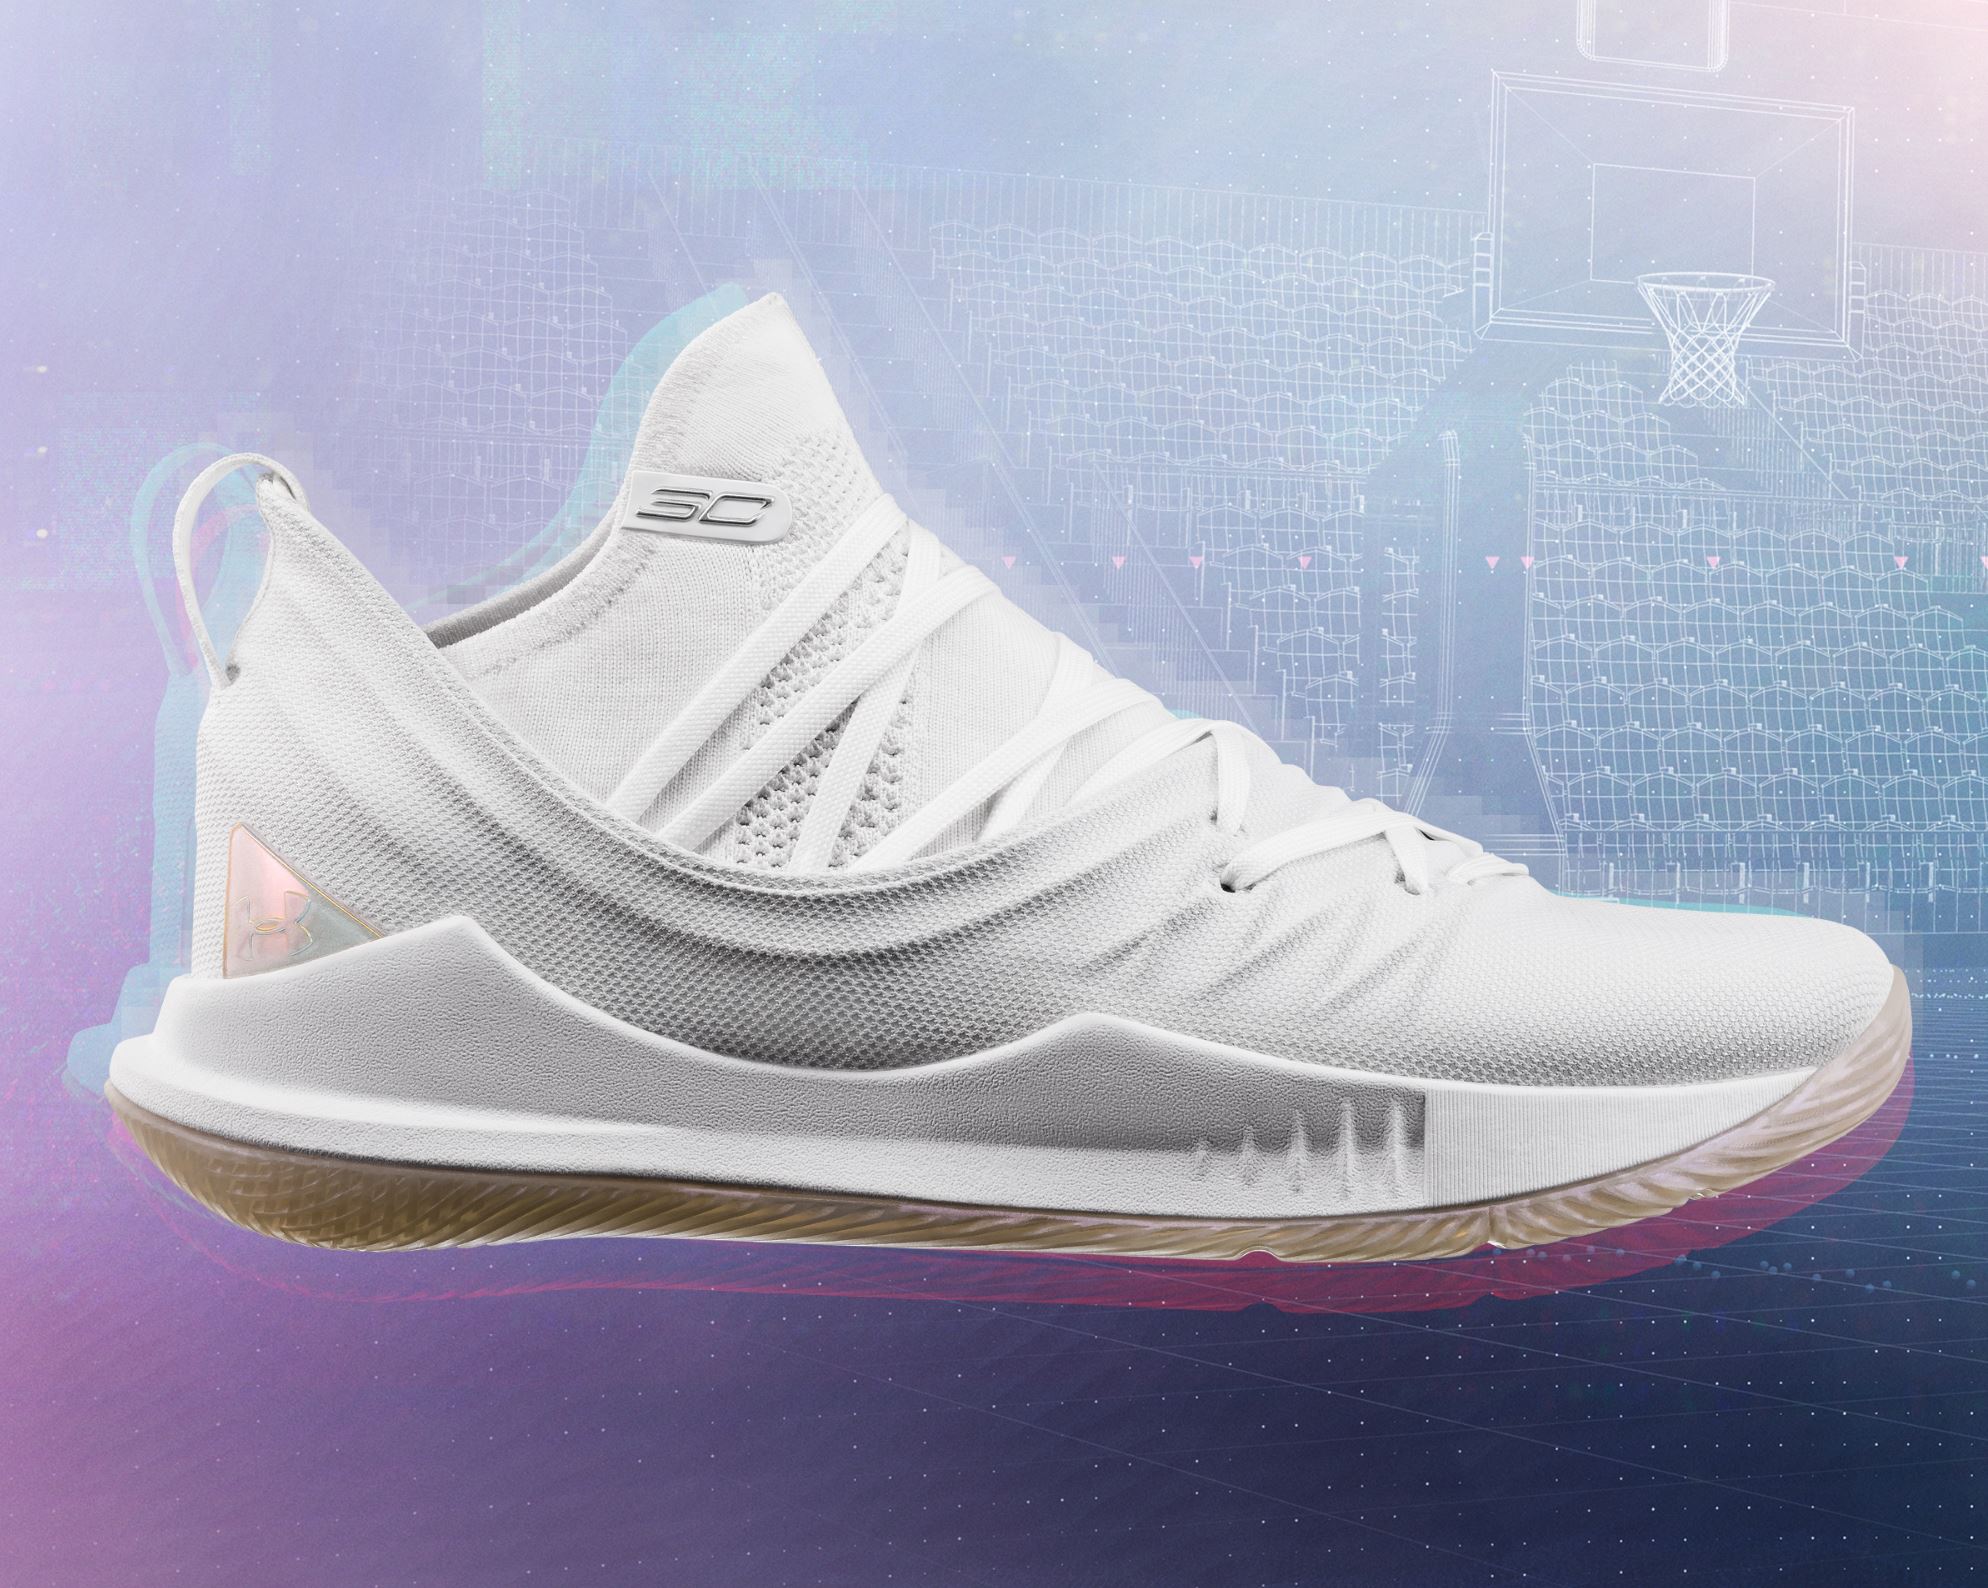 white curry 5